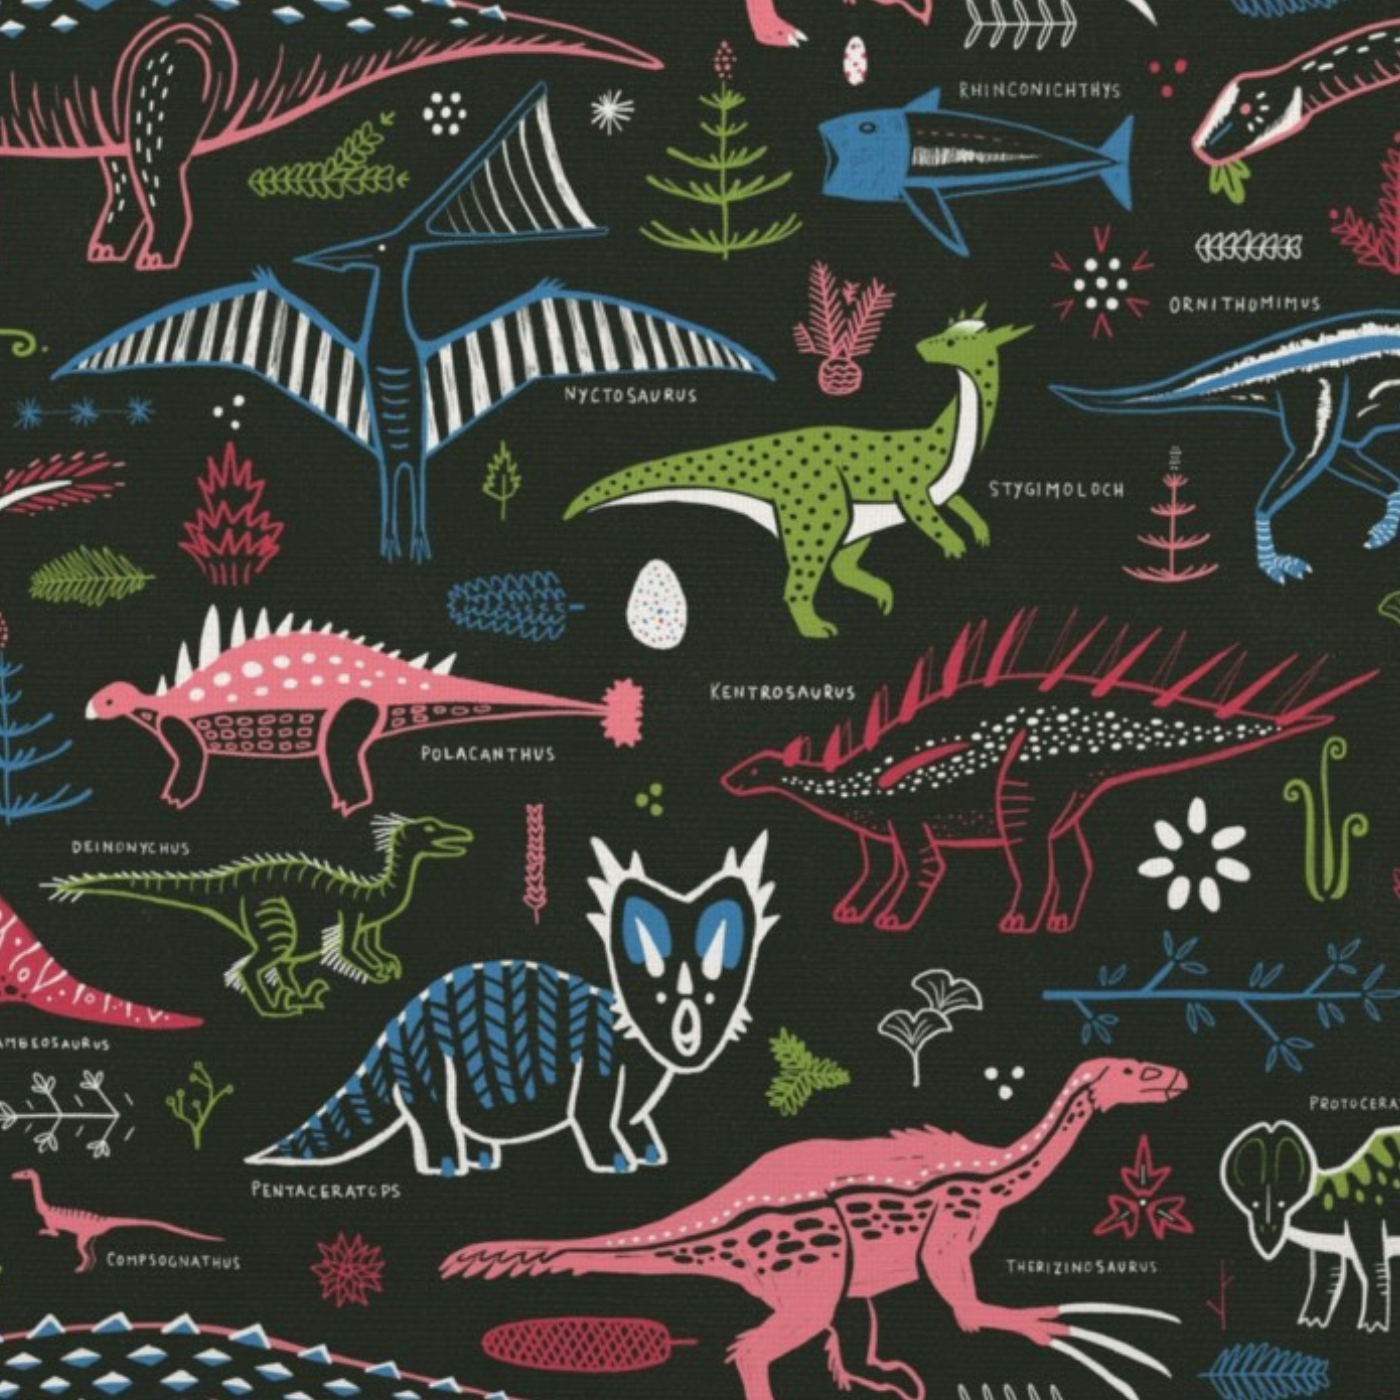 A design featuring lesser-known dinosaurs in bright blue, green, pink and hot pink on a black background. A pink polacanthus with a black underbelly and white spots on its back and white spikes looks to the left. A green-outlined deinoncychus looks to the right and has white spiky accents on its back, legs and back of the head. A blue pentaceratops looks straight at the viewer with black lined accents, a white outlined underbelly and legs and white spikes on its head and face.